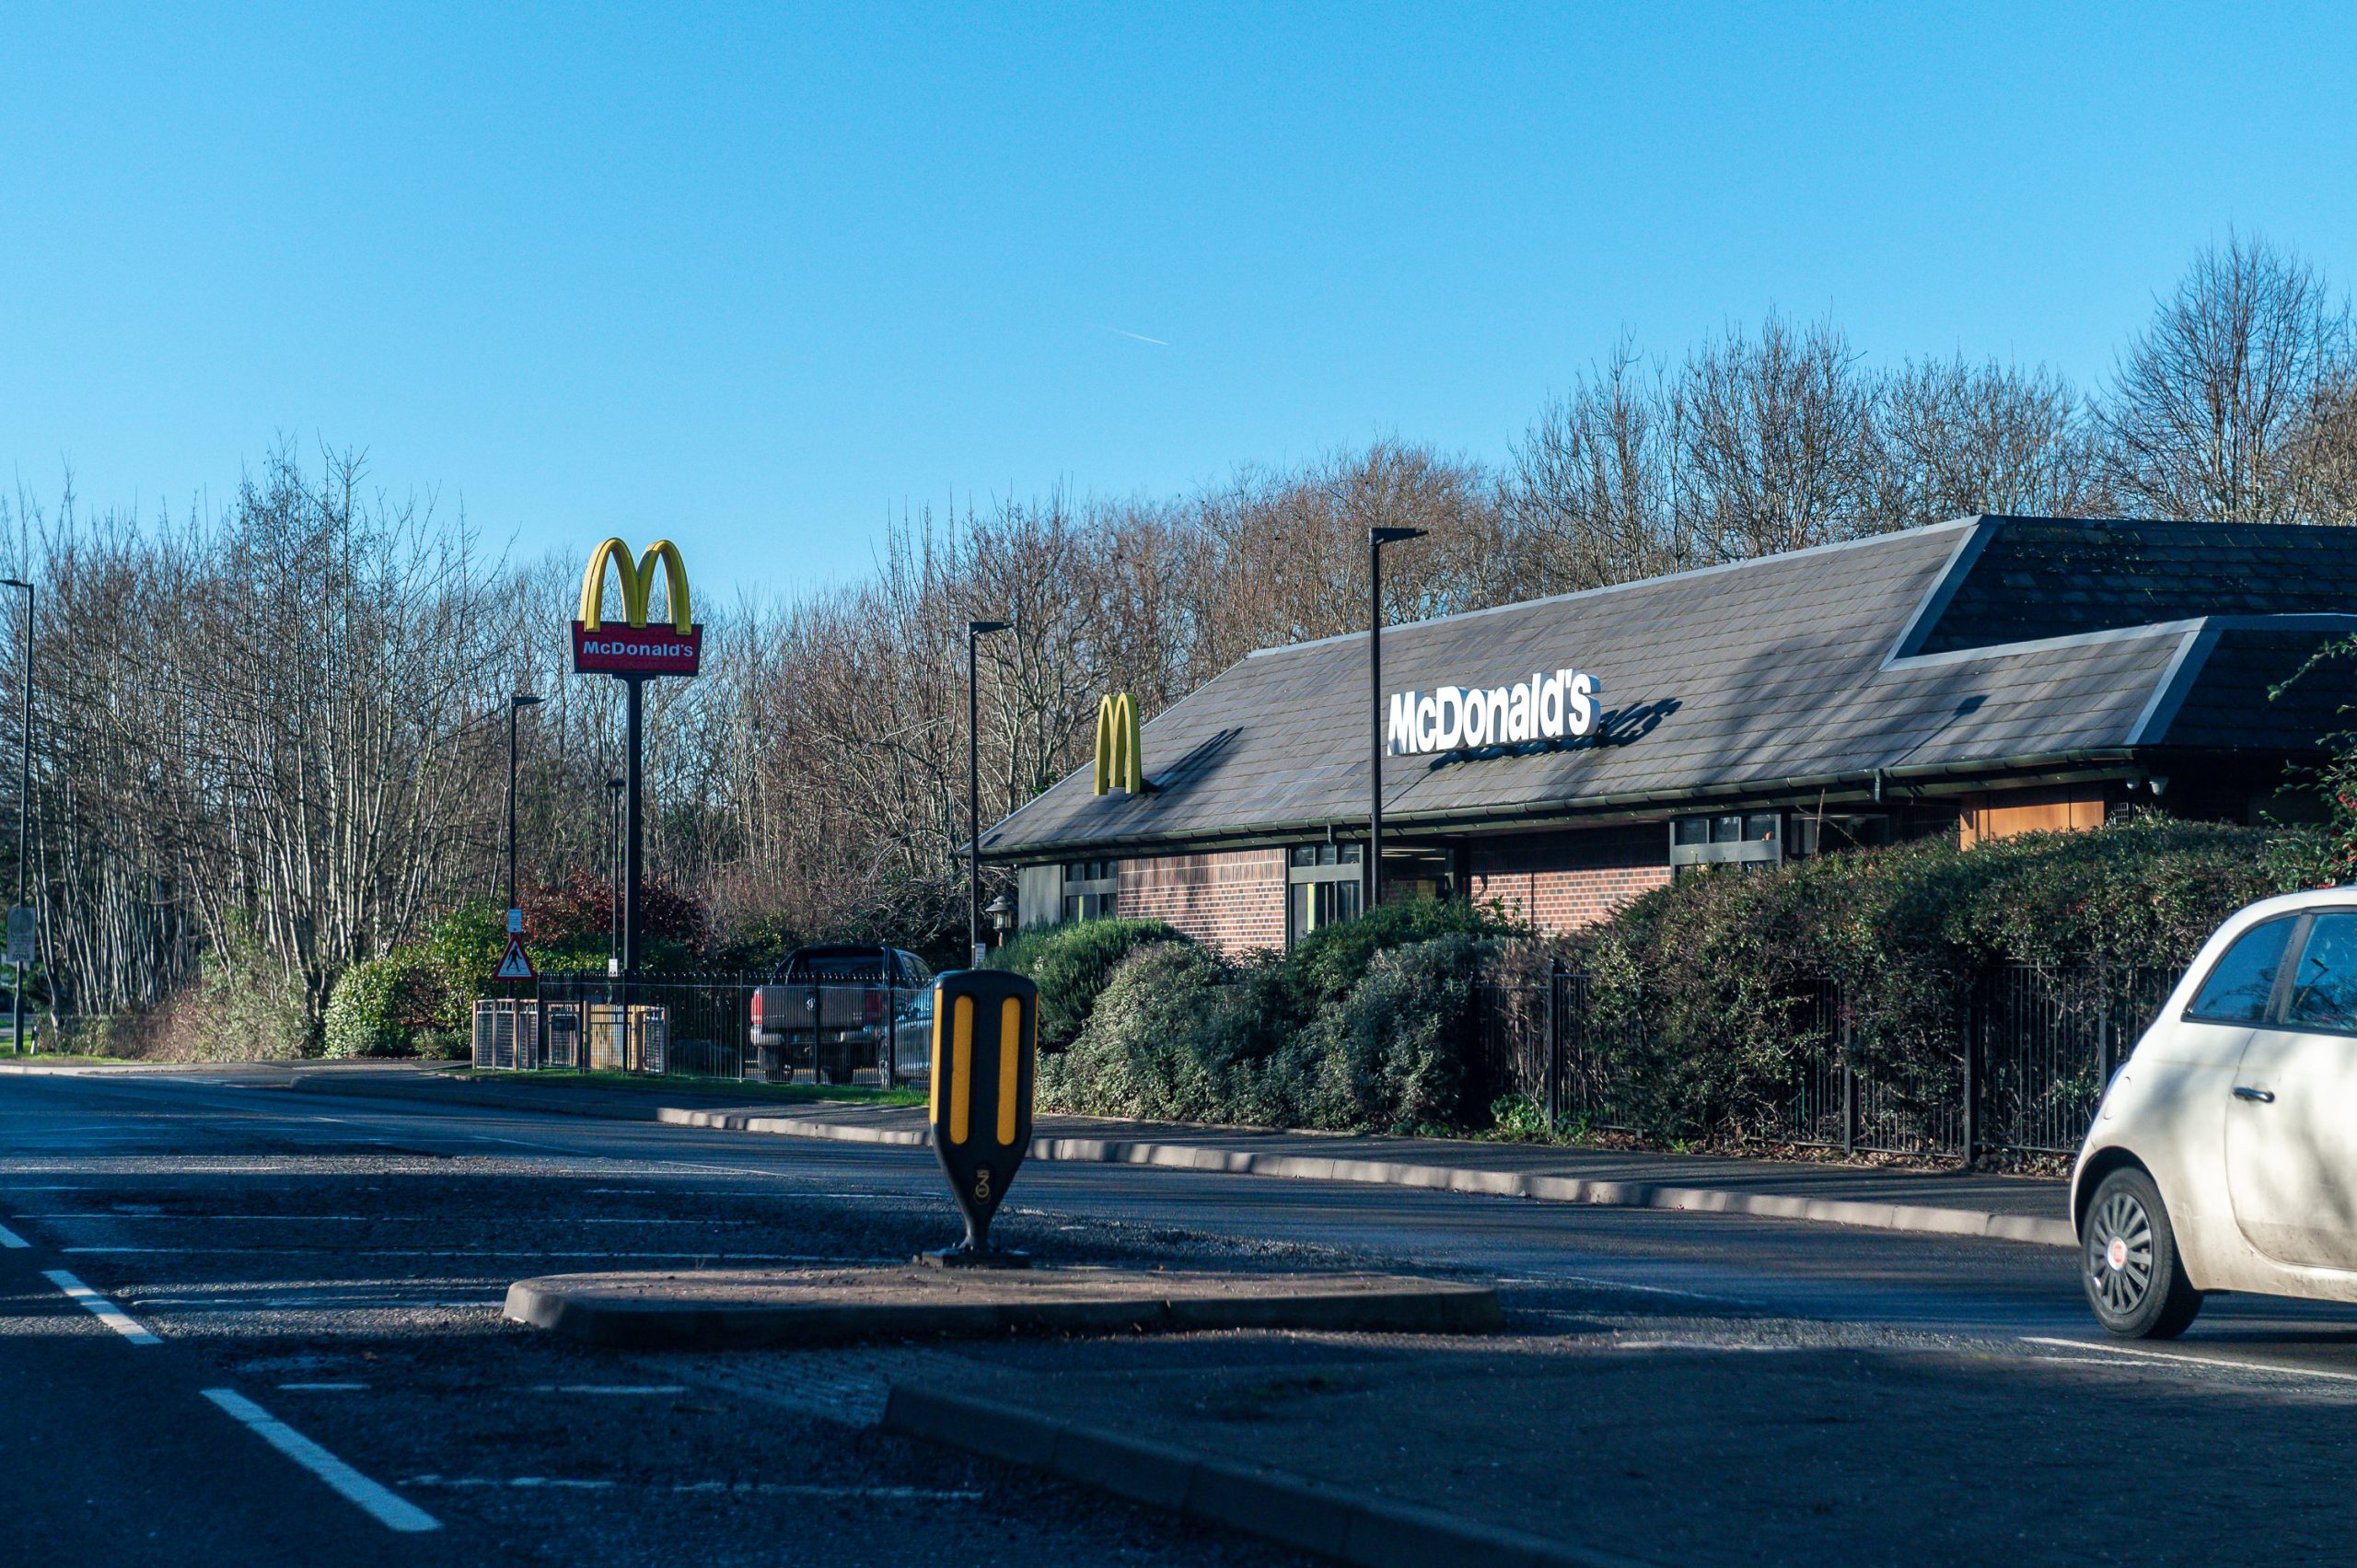 NEWS | The law around using your mobile phone while queueing at a Drive-Thru restaurant will change next month – MORE DETAILS